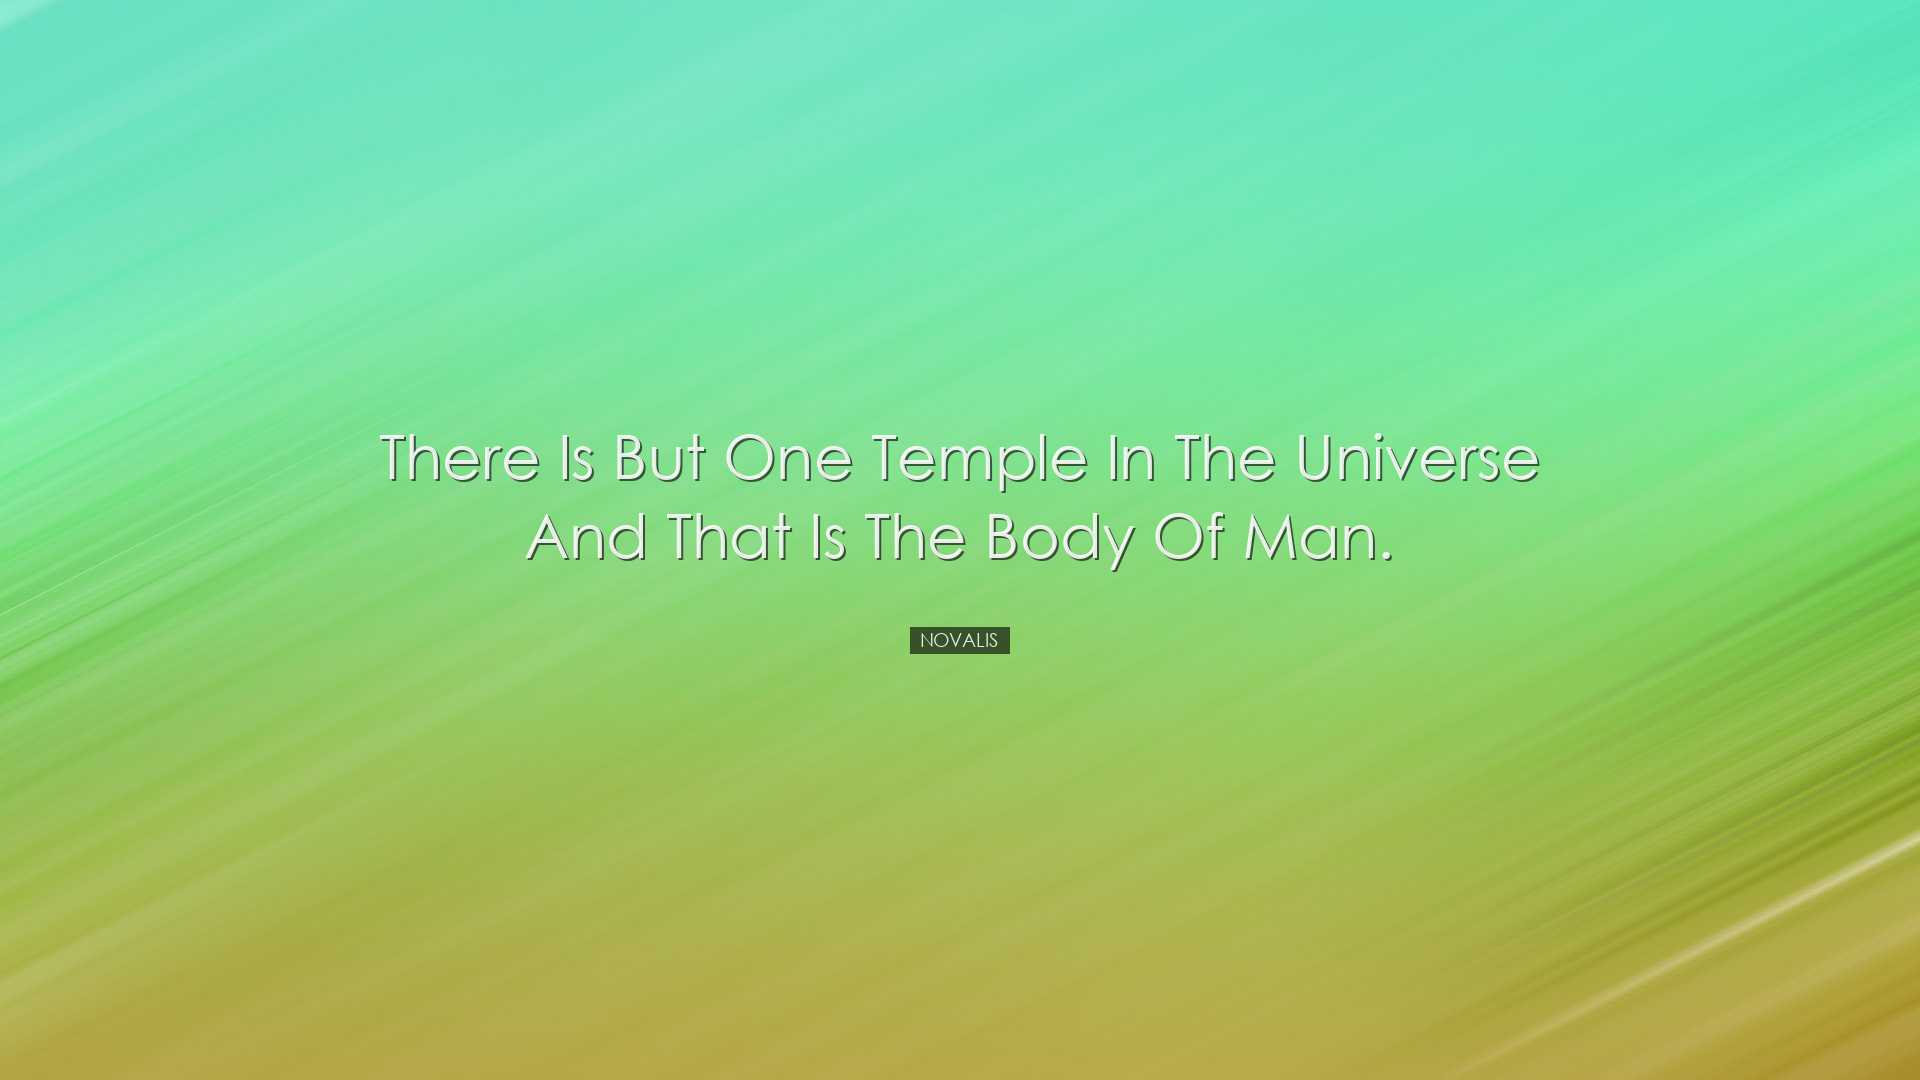 There is but one temple in the universe and that is the body of ma